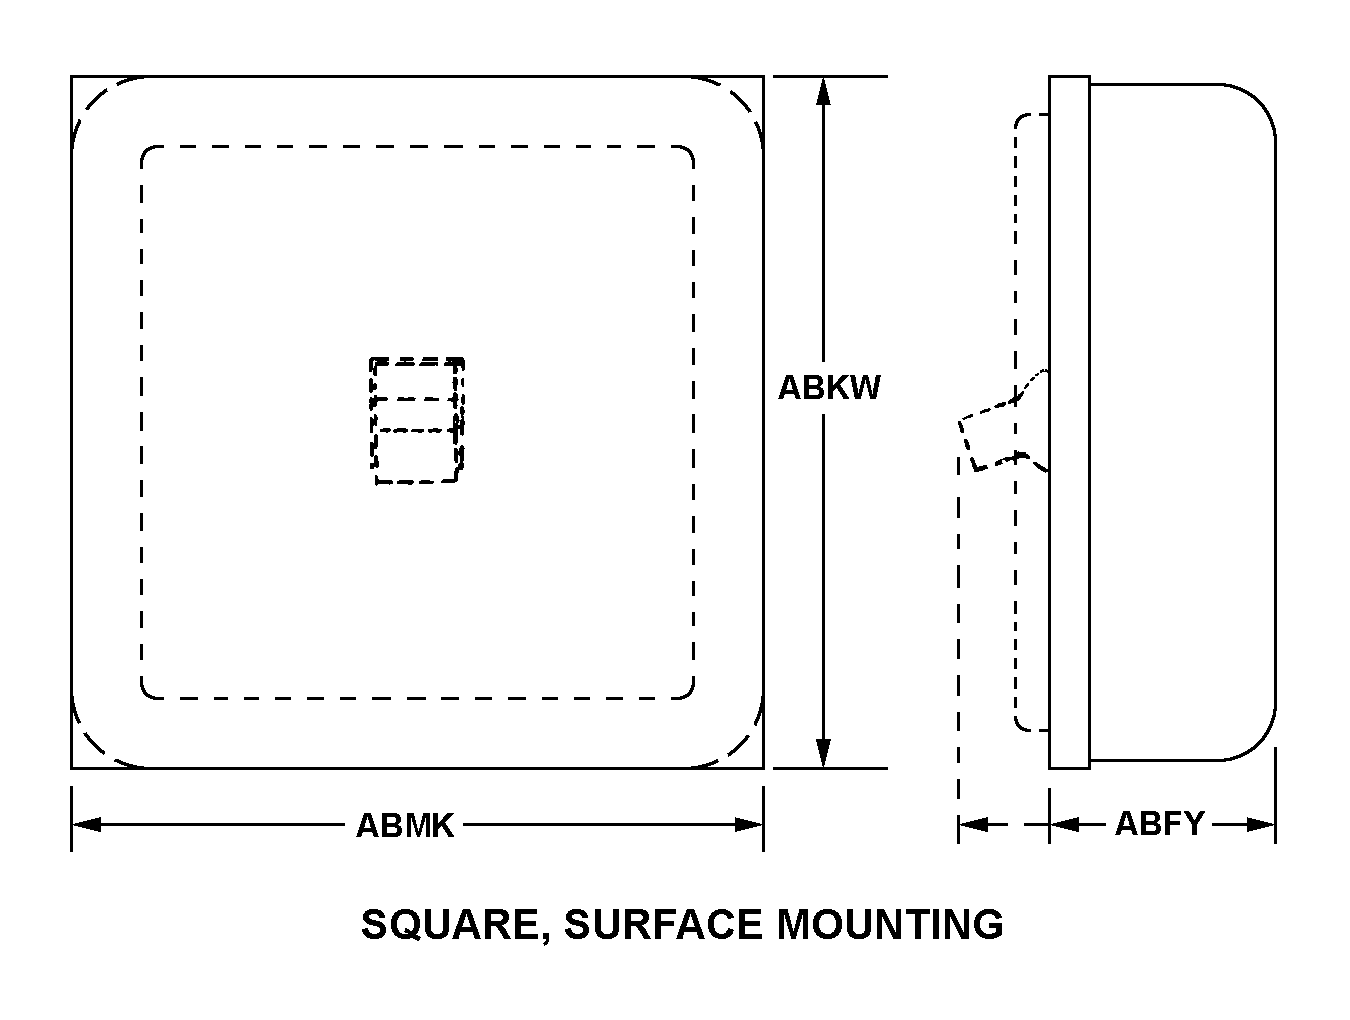 SQUARE, SURFACE MOUNTING style nsn 5940-00-472-4600